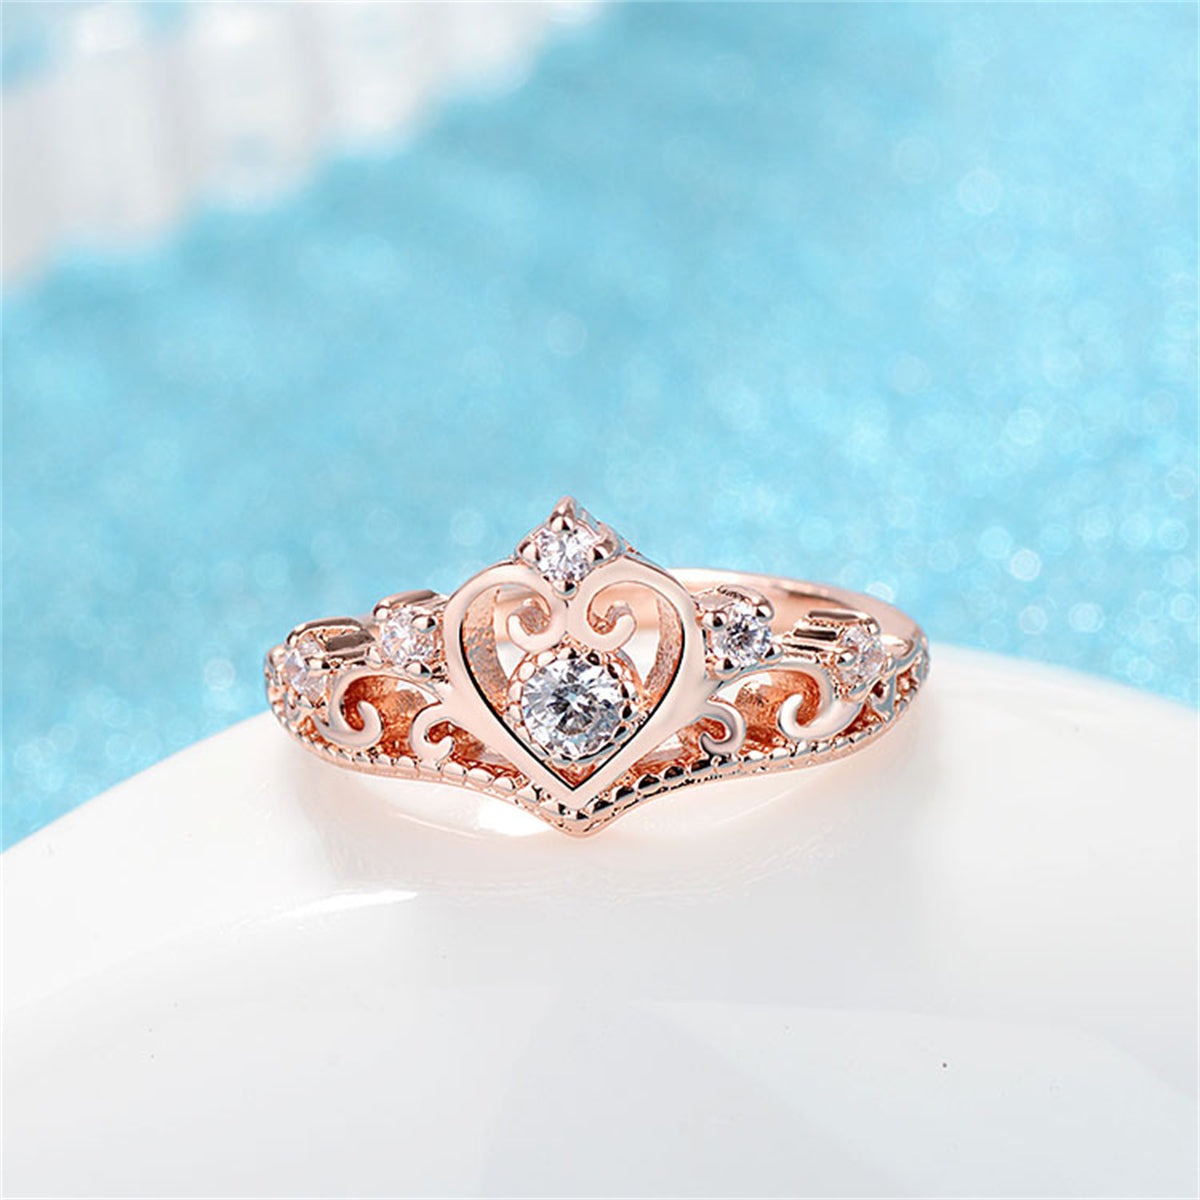 Crystal & Cubic Zirconia 18K Rose Gold-Plated Crown Ring